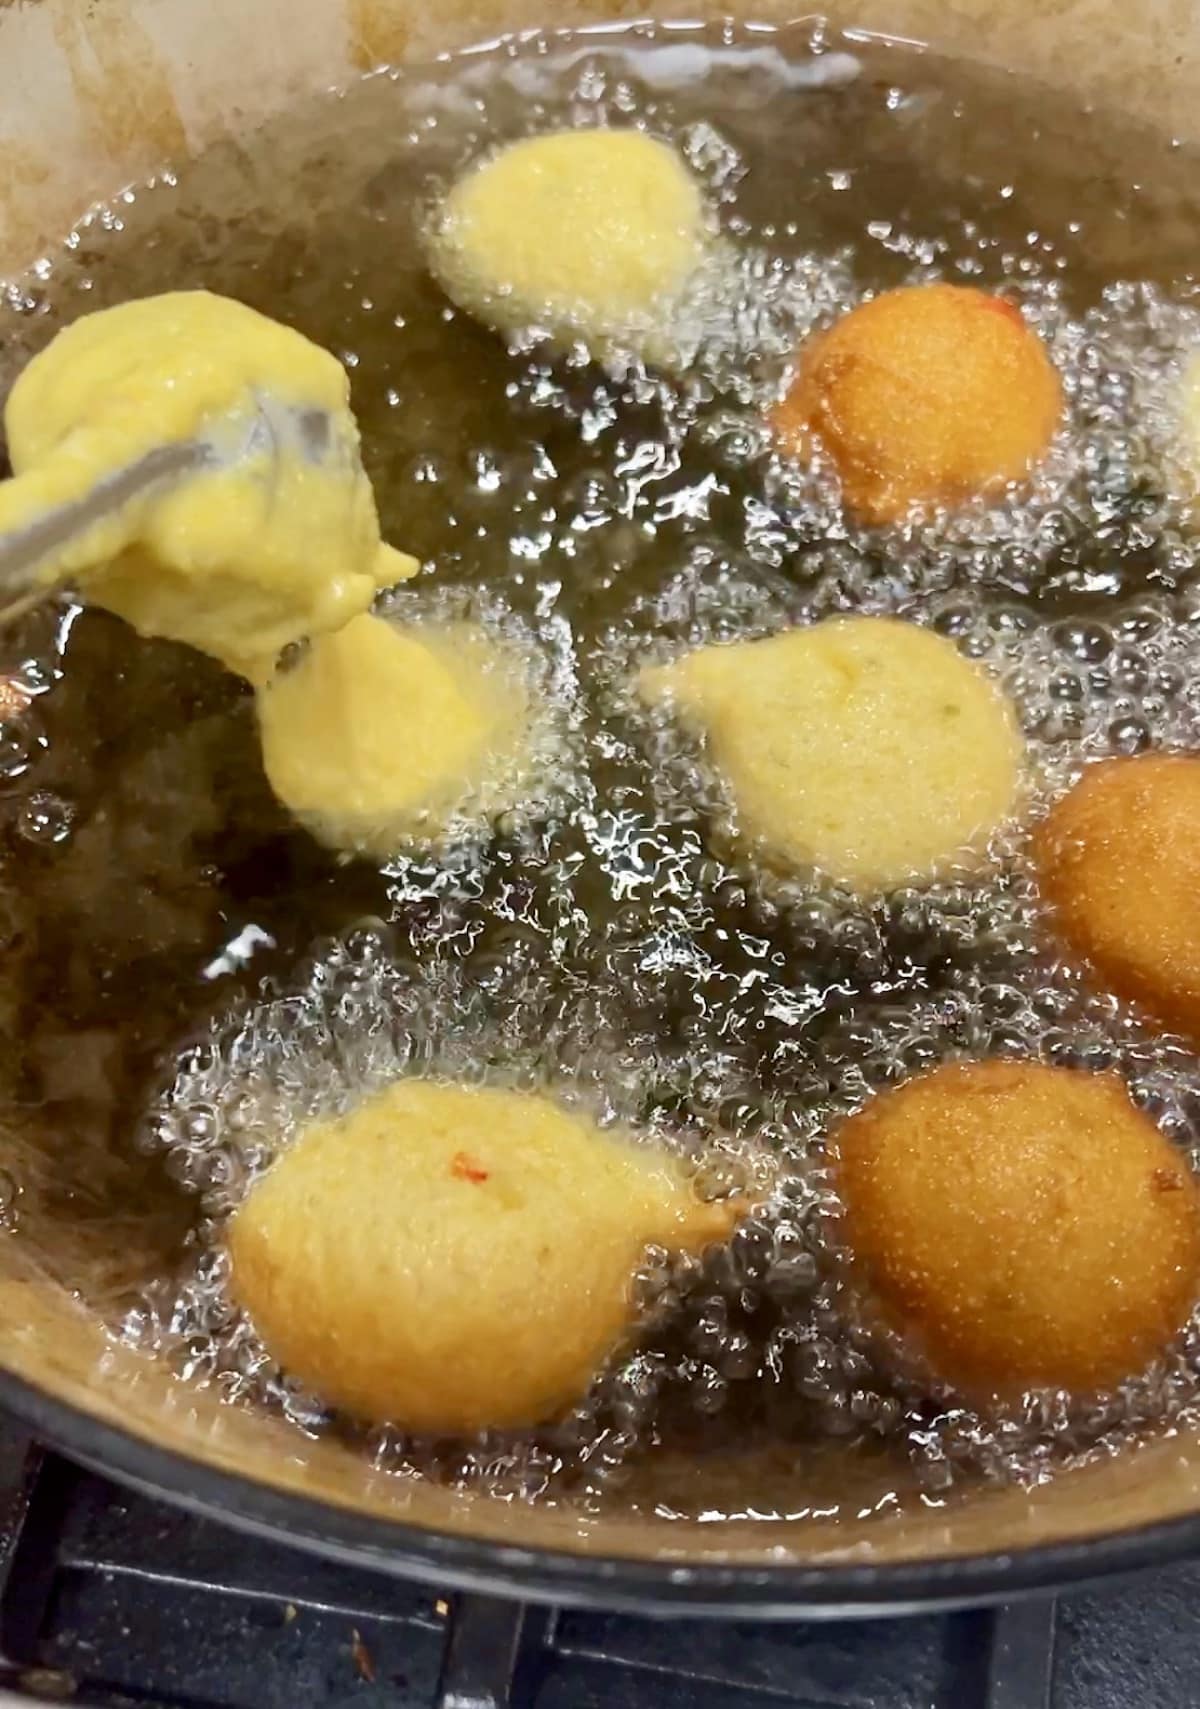 Dropping hush puppy batter into hot oil using a cookie scoop.